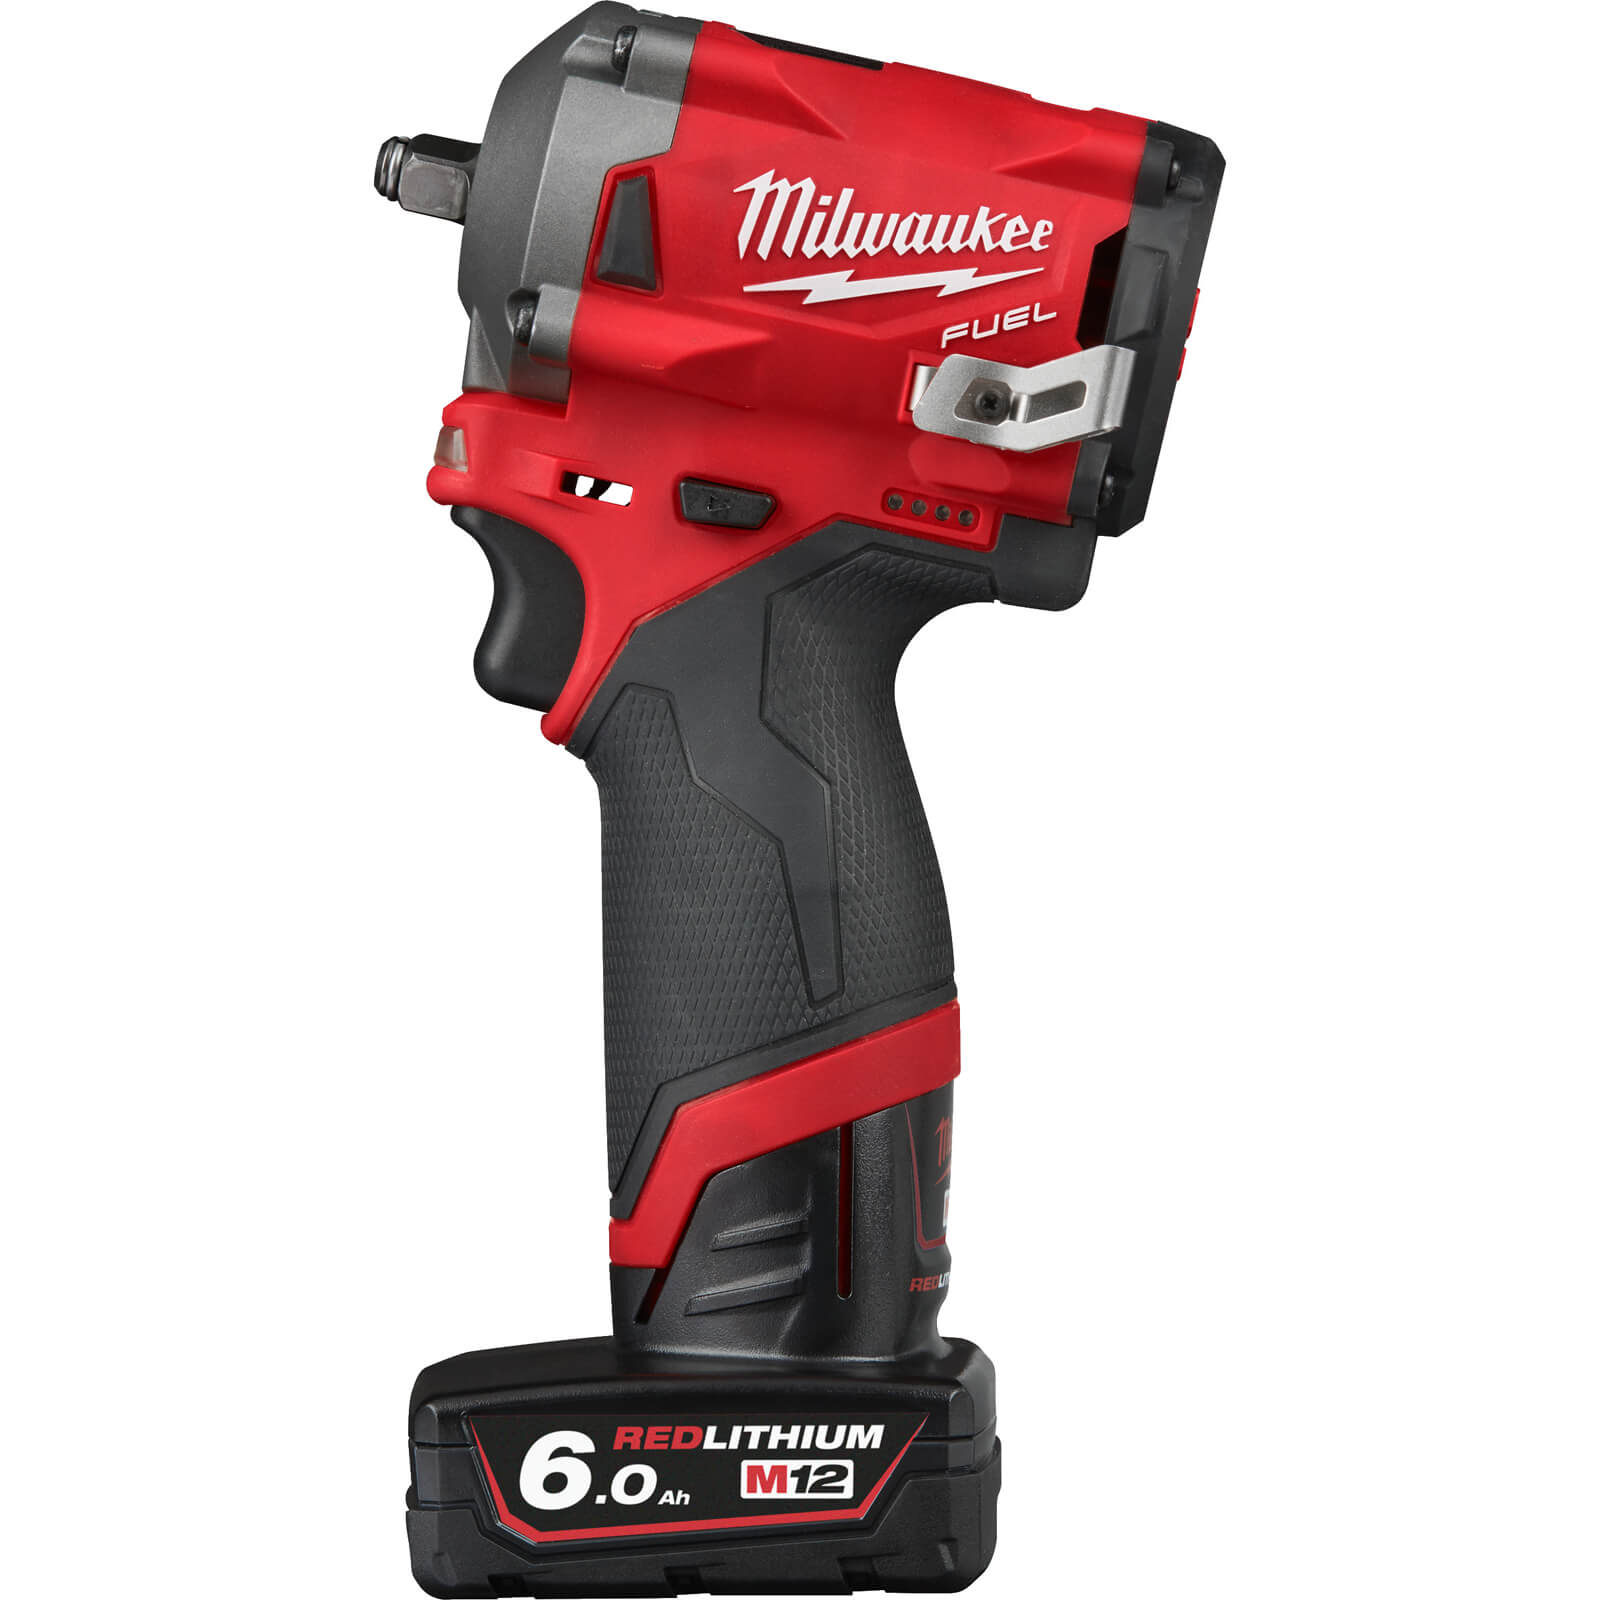 Image of Milwaukee M12 FIW38 Fuel 12v Cordless Brushless 3/8" Drive Impact Wrench 1 x 2ah & 1 x 6ah Li-ion Charger Case